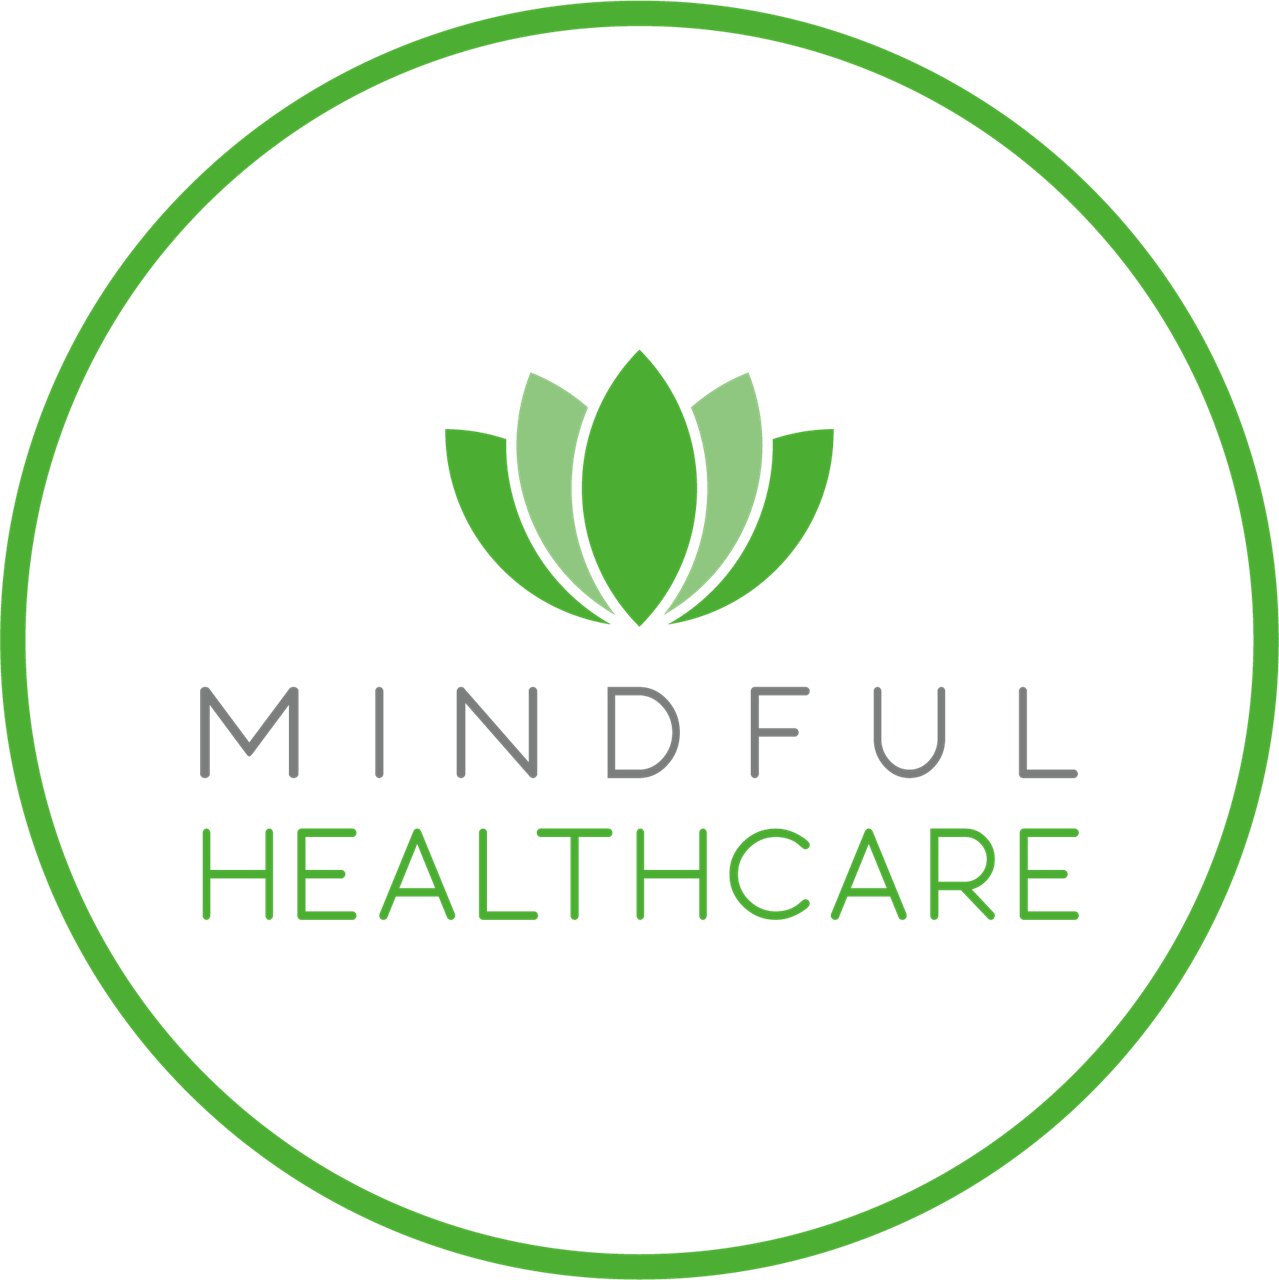 Mindful Healthcare (opens in a new window)